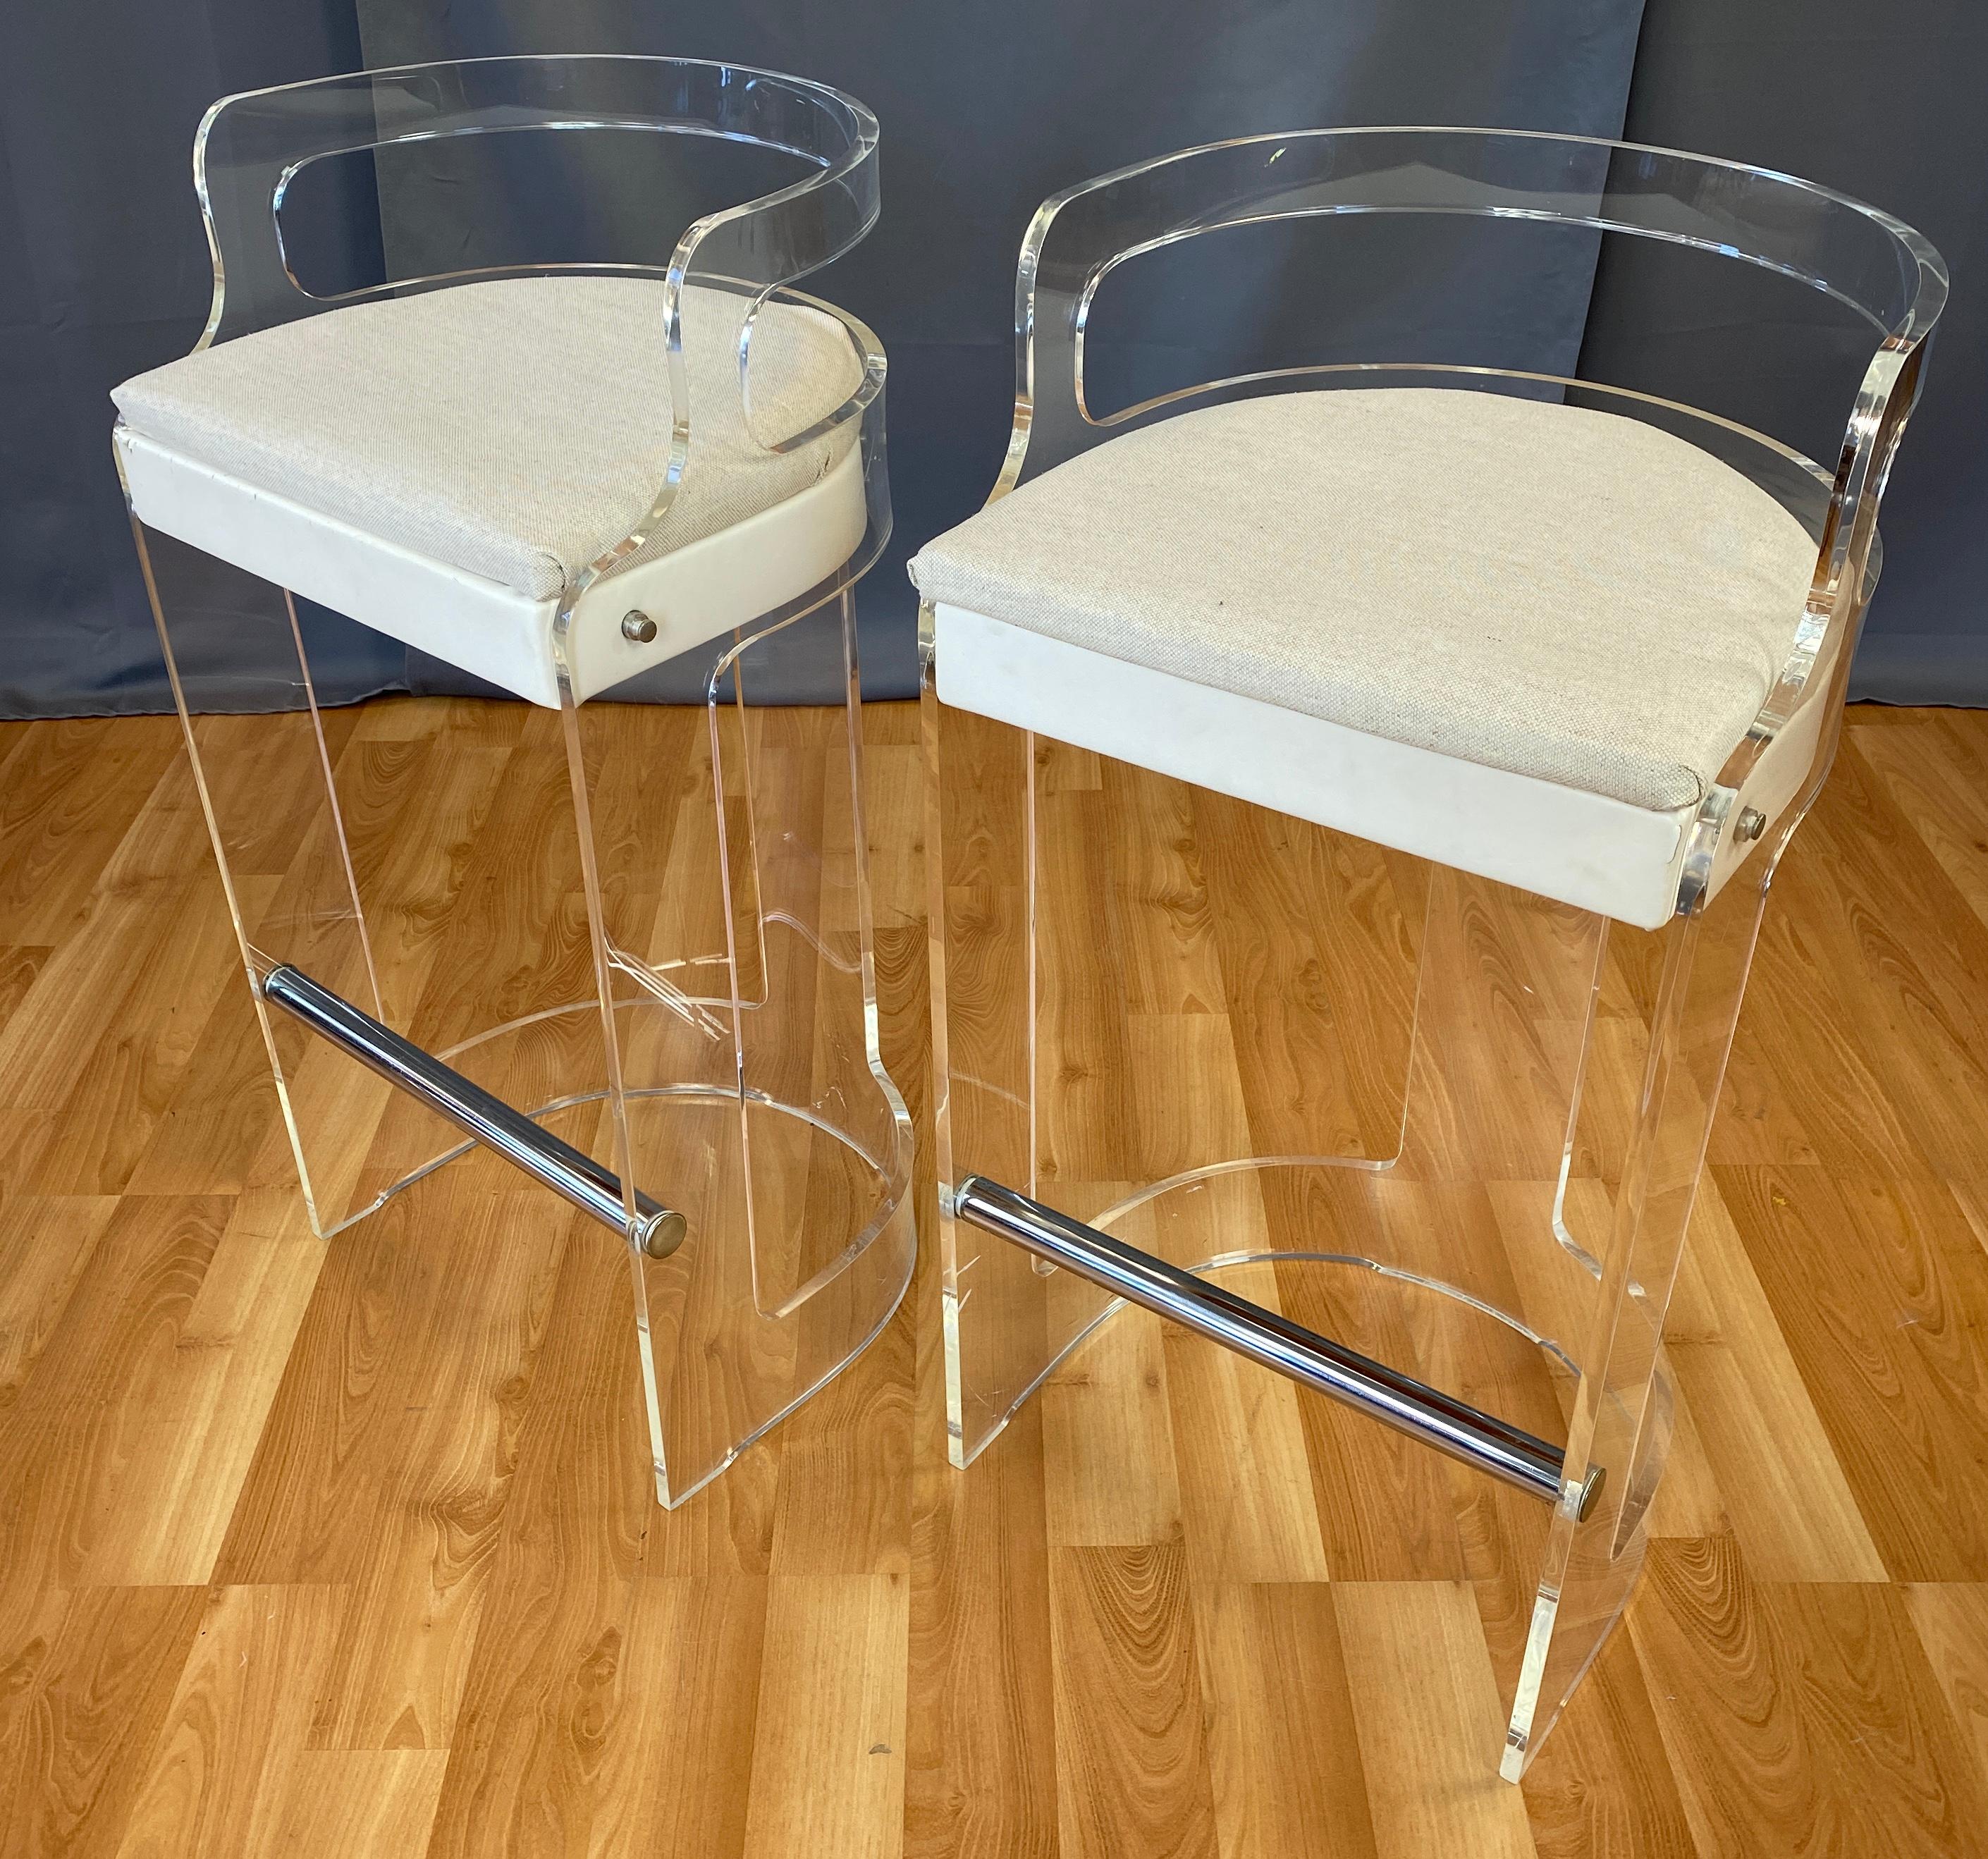 Wonderful pair of 1970s Space Age Lucite bar stools by Hill Mfg of Newburgh New York.
It's look and style is up there with the work of Charles Hollis Jones and Ritts Co.
Bar stools are a nice tall drum shape, with the Lucite frame being all one